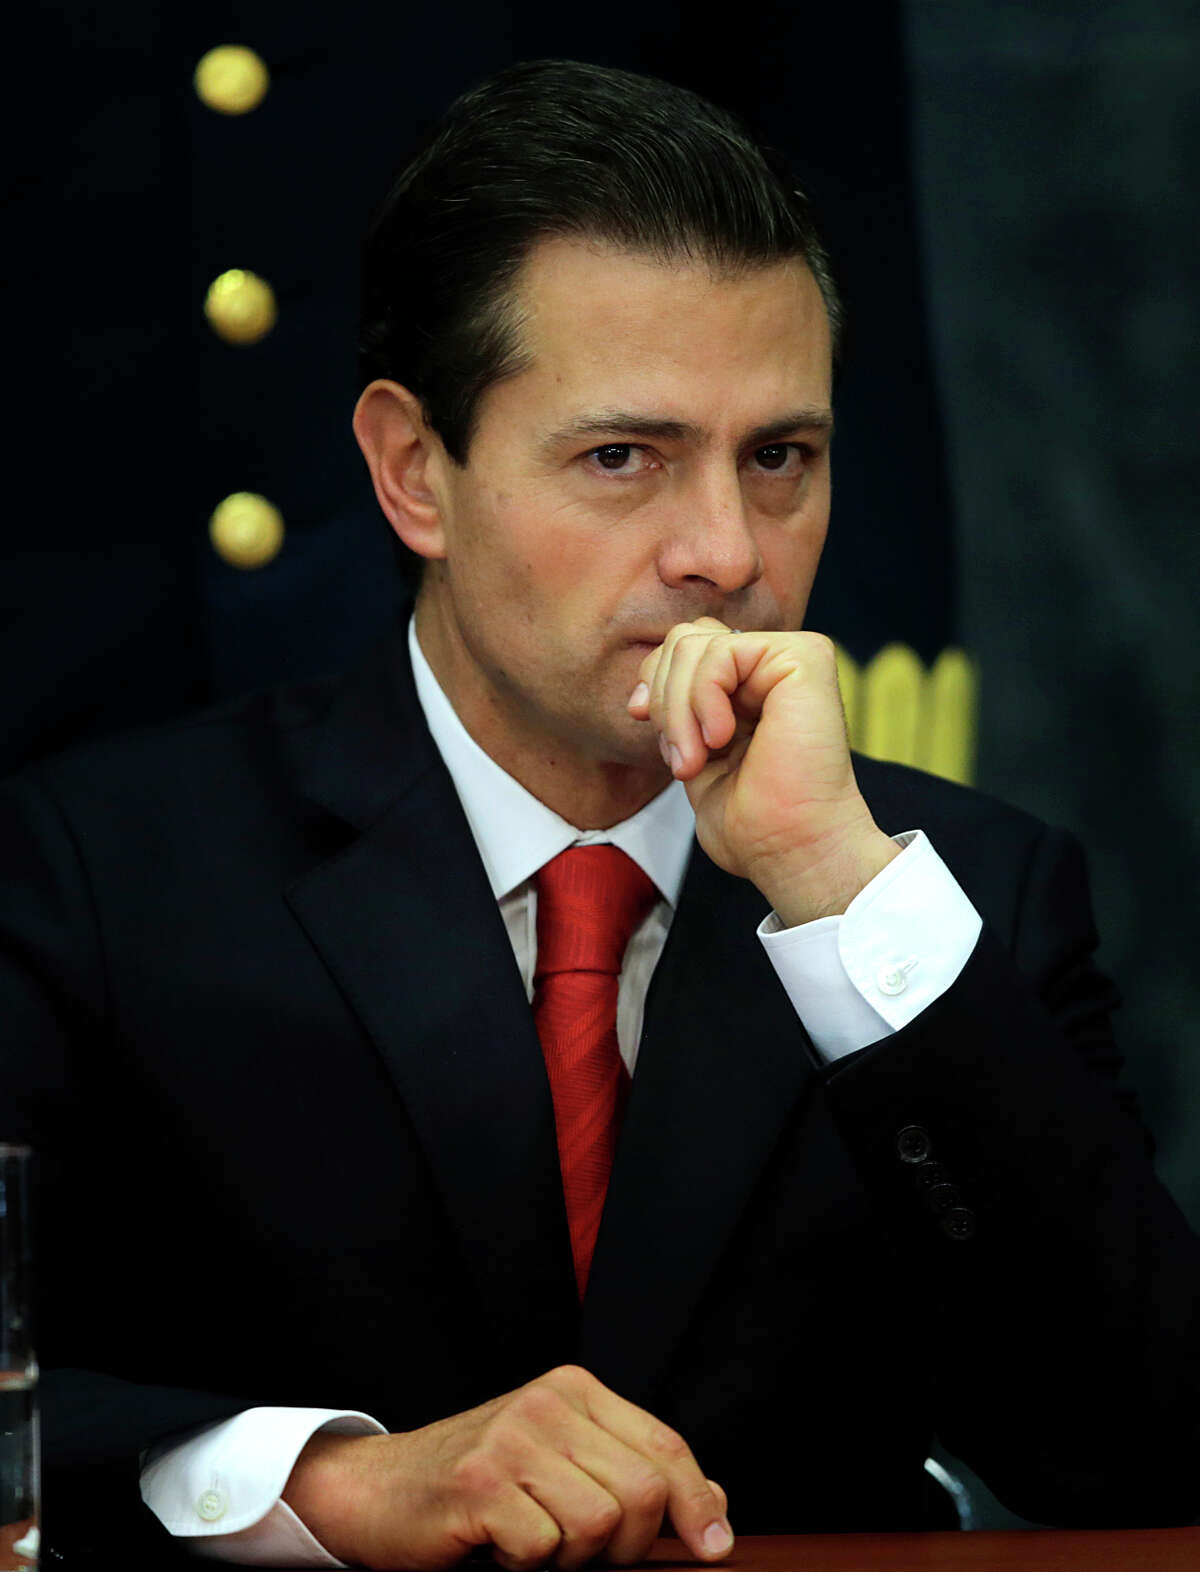 Mexico's President Enrique Peña Nieto﻿ says "all the issues... are on the table" in renegotiating U.S.-Mexico relations.